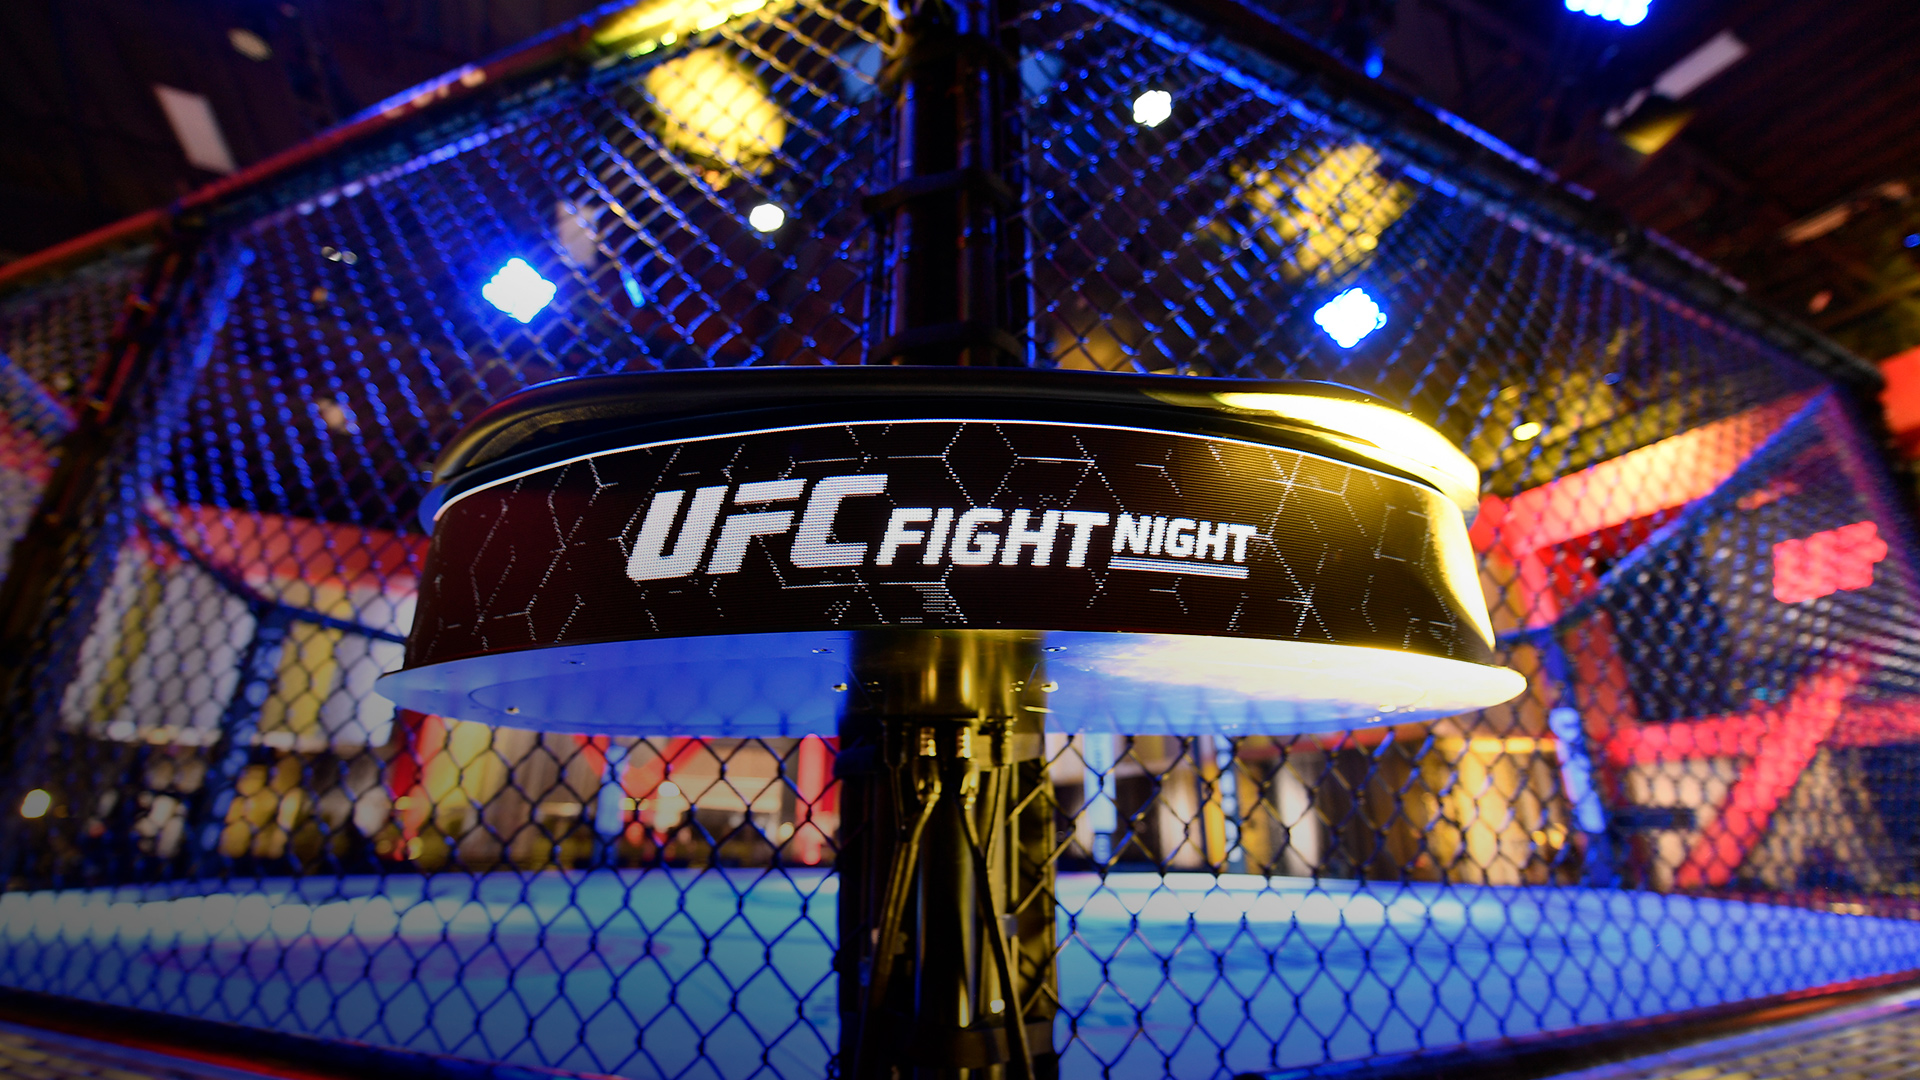 A general view of the Octagon prior to the UFC Fight Night event at UFC APEX on February 05, 2022 in Las Vegas, Nevada. (Photo by Chris Unger/Zuffa LLC)